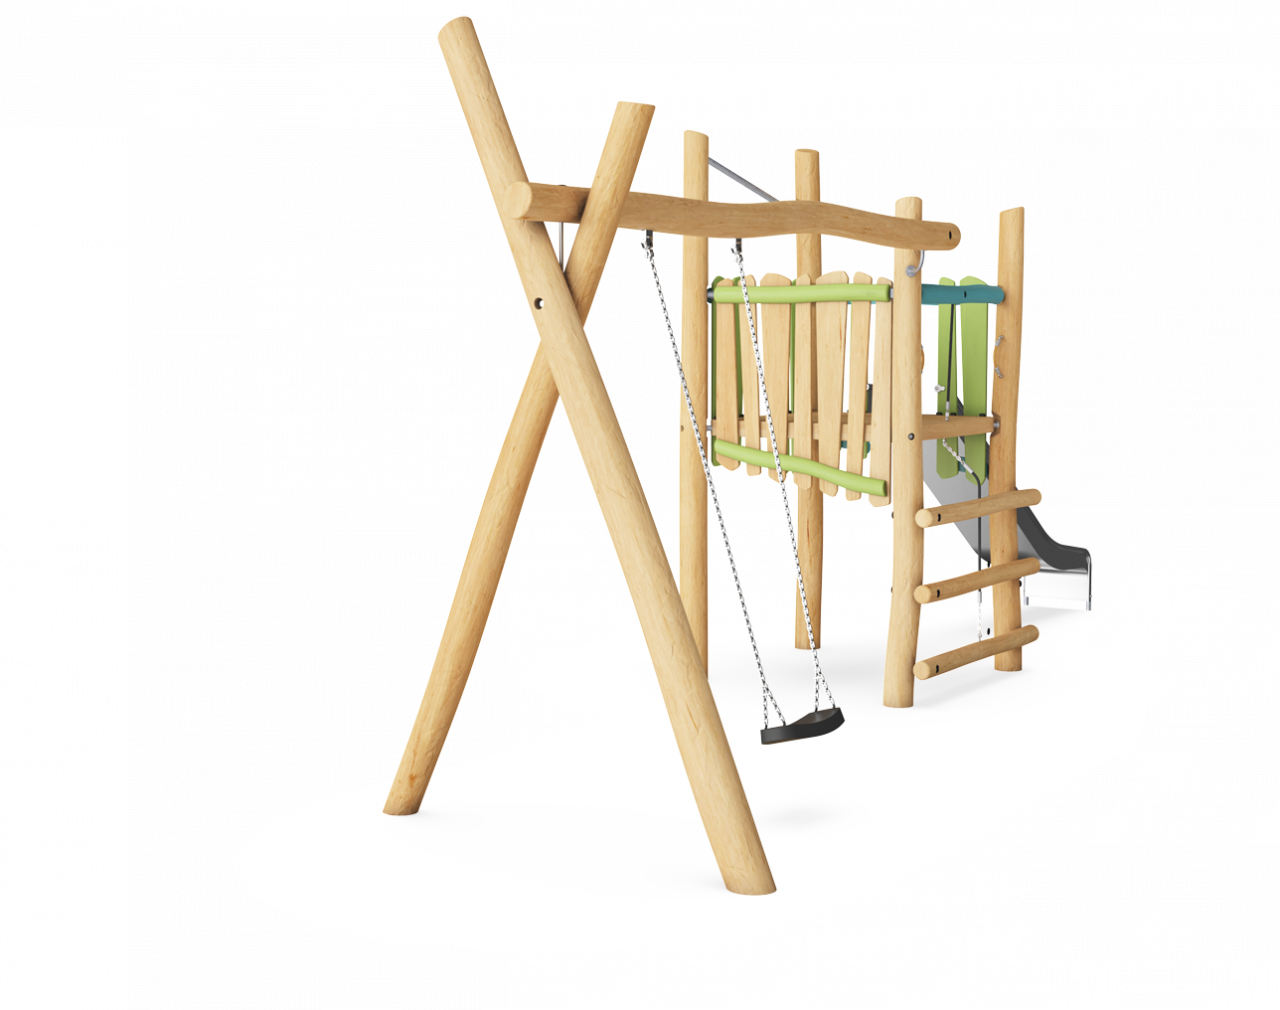 Slide and Swing Tower